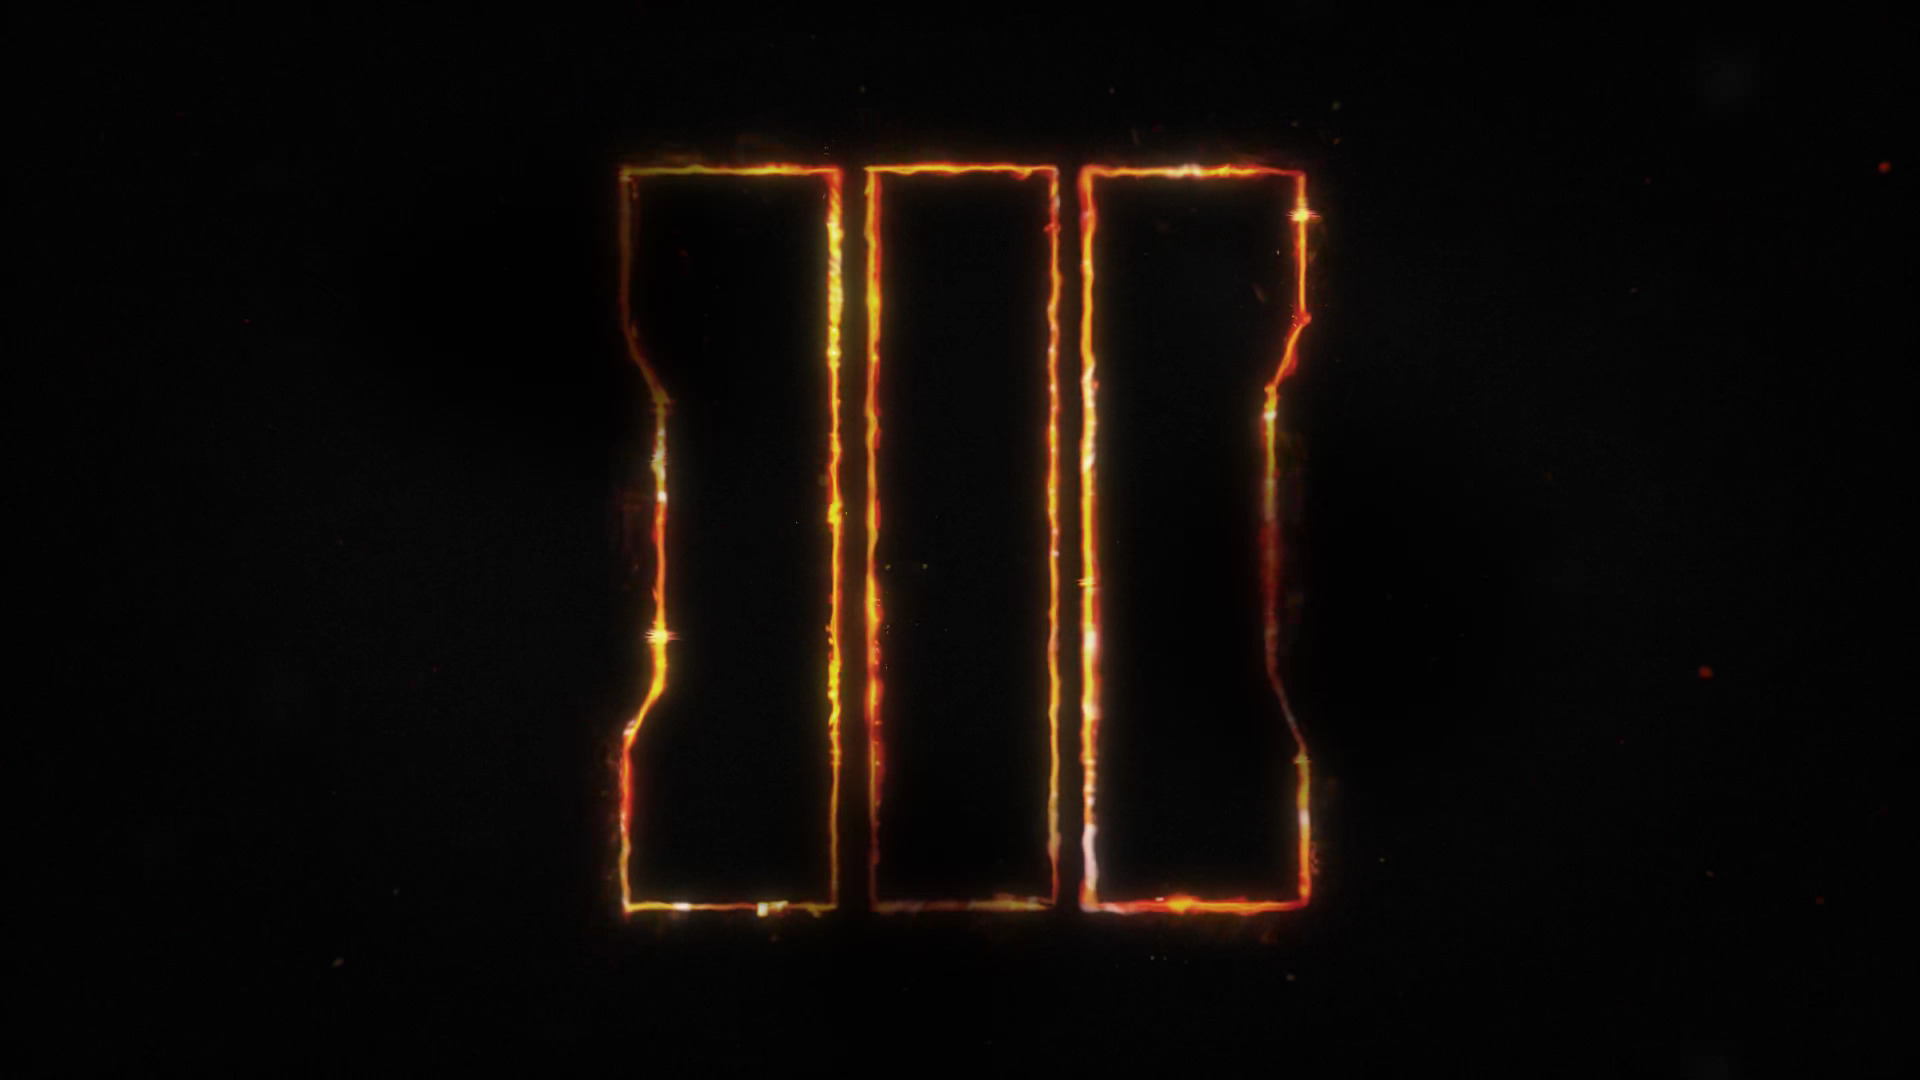 Media asset in full size related to 3dfxzone.it news item entitled as follows: Activision pubblica il teaser trailer di Call of Duty: Black Ops III | Image Name: news22460_call-of-duty-black-ops-3-teaser_1.jpg